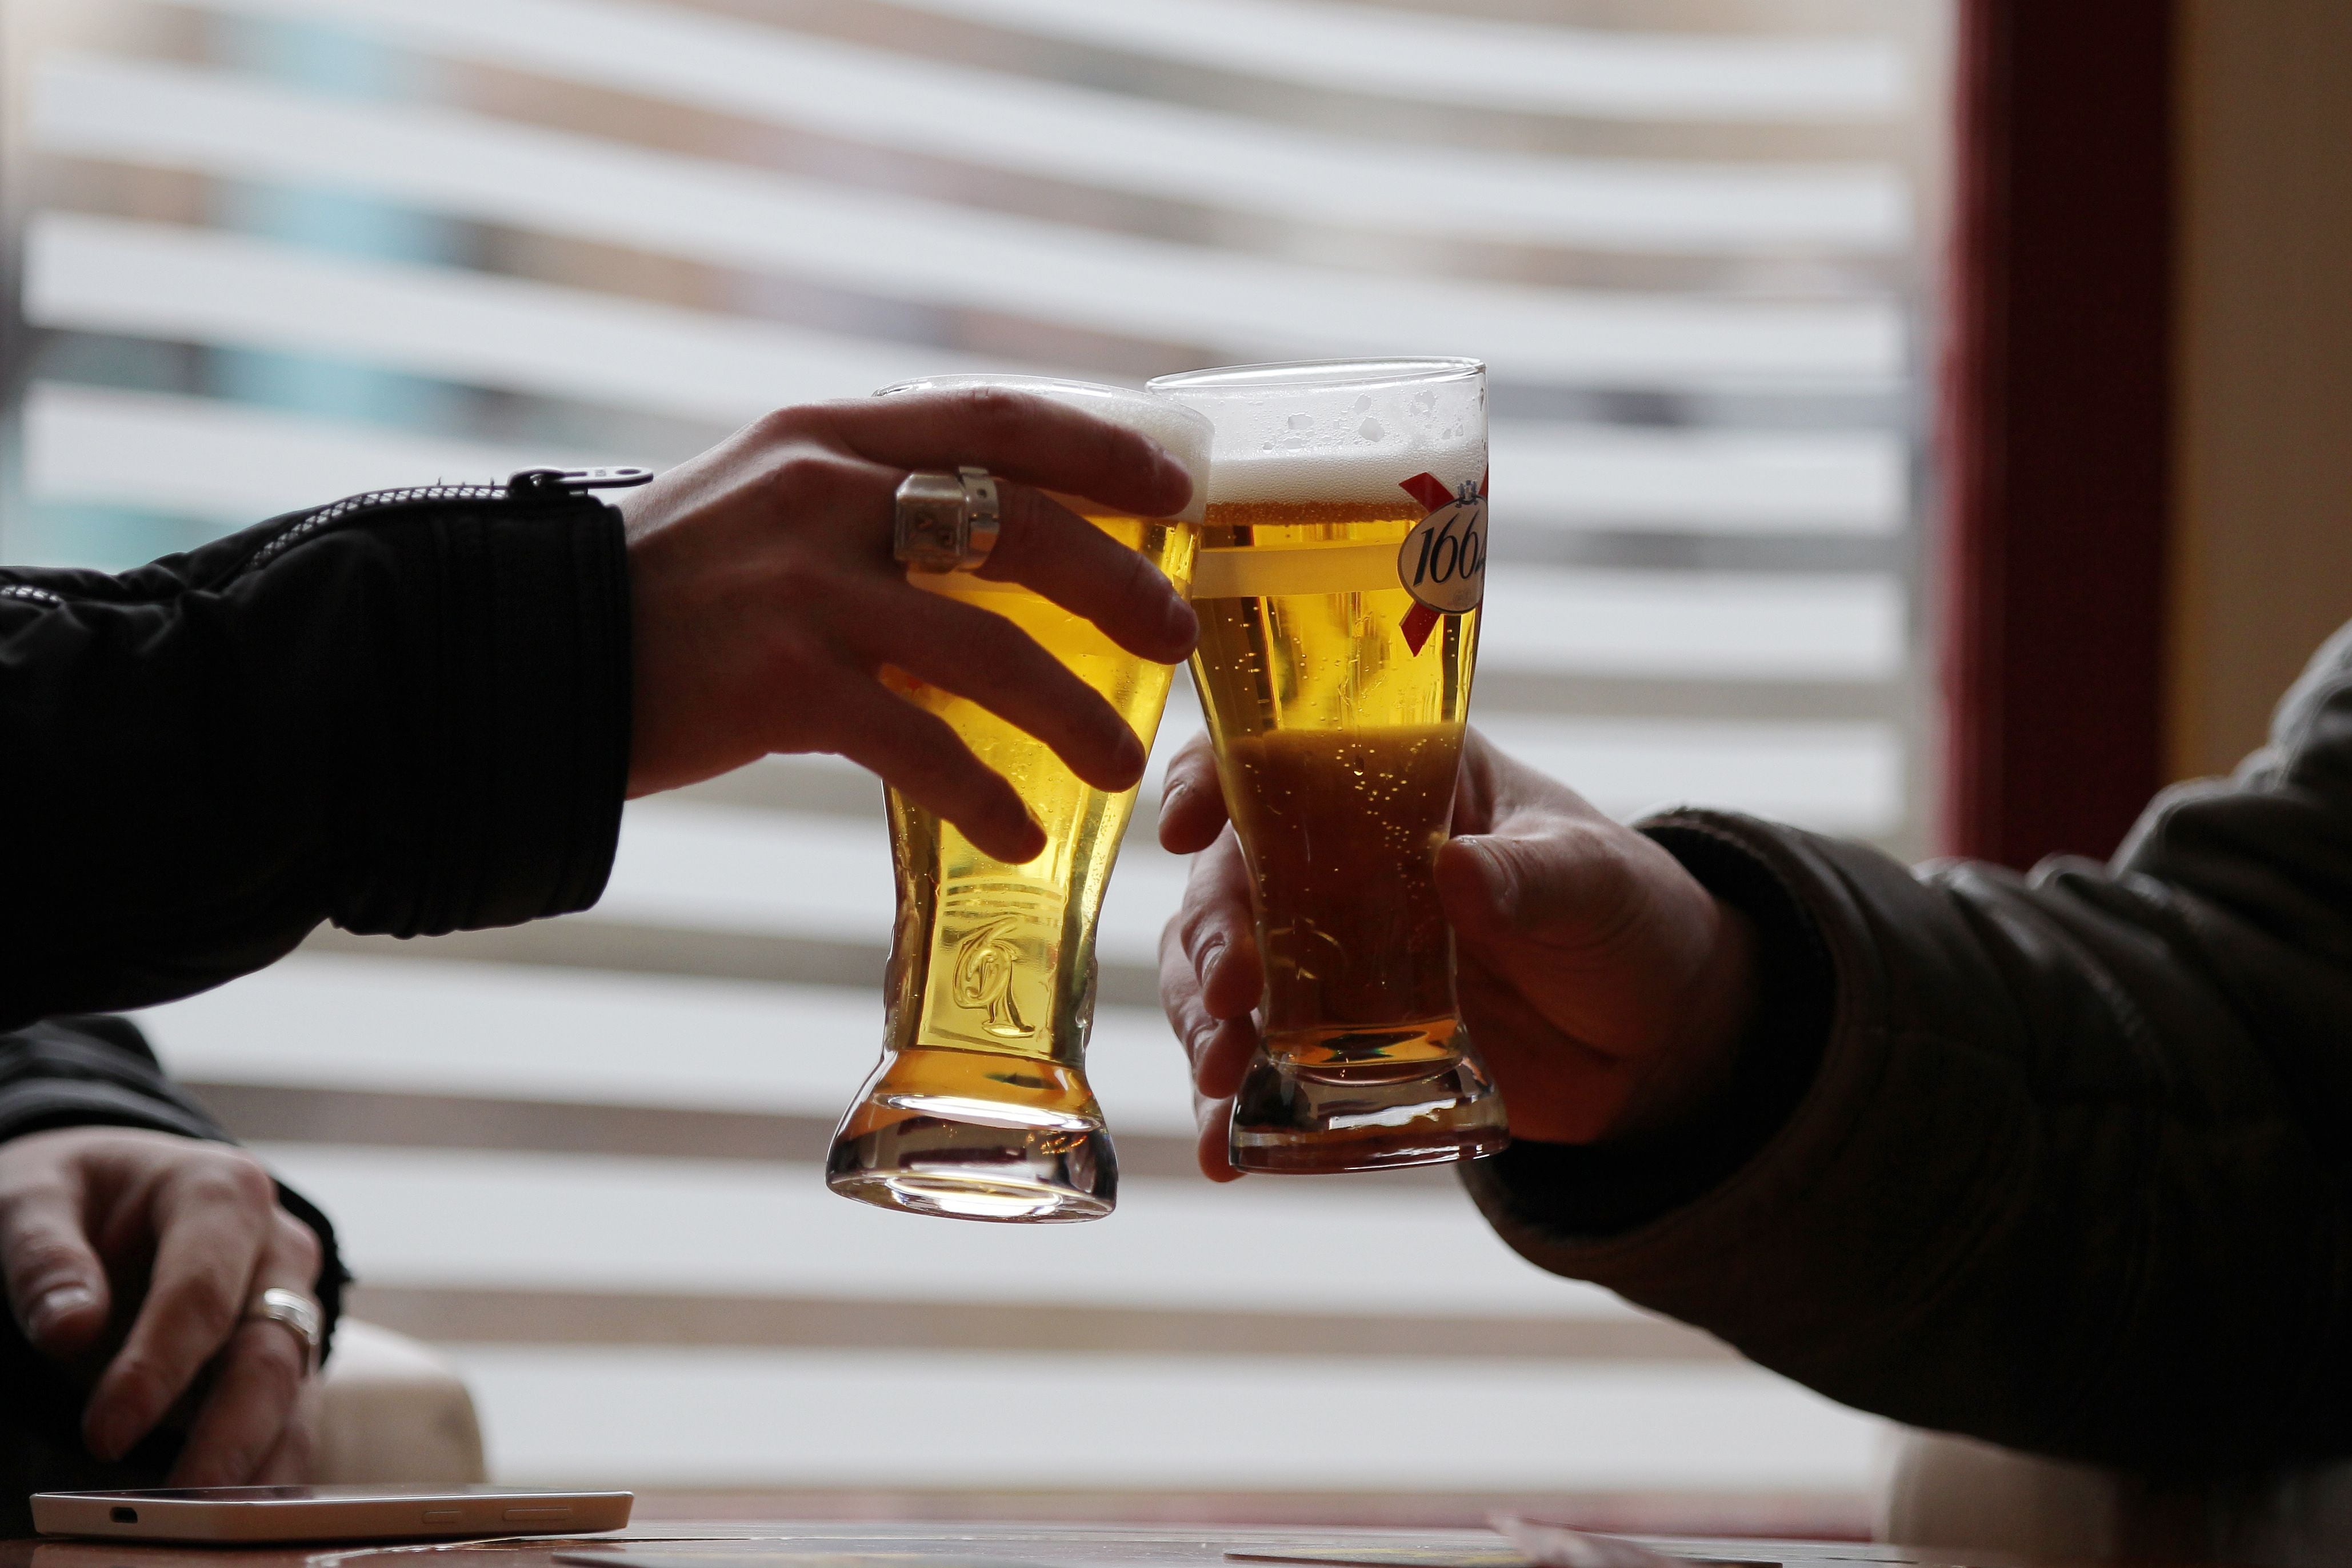 Representative image: Researchers conducted a field-based study of heavy drinking young adults to determine the accuracy and acceptability of a new sensor